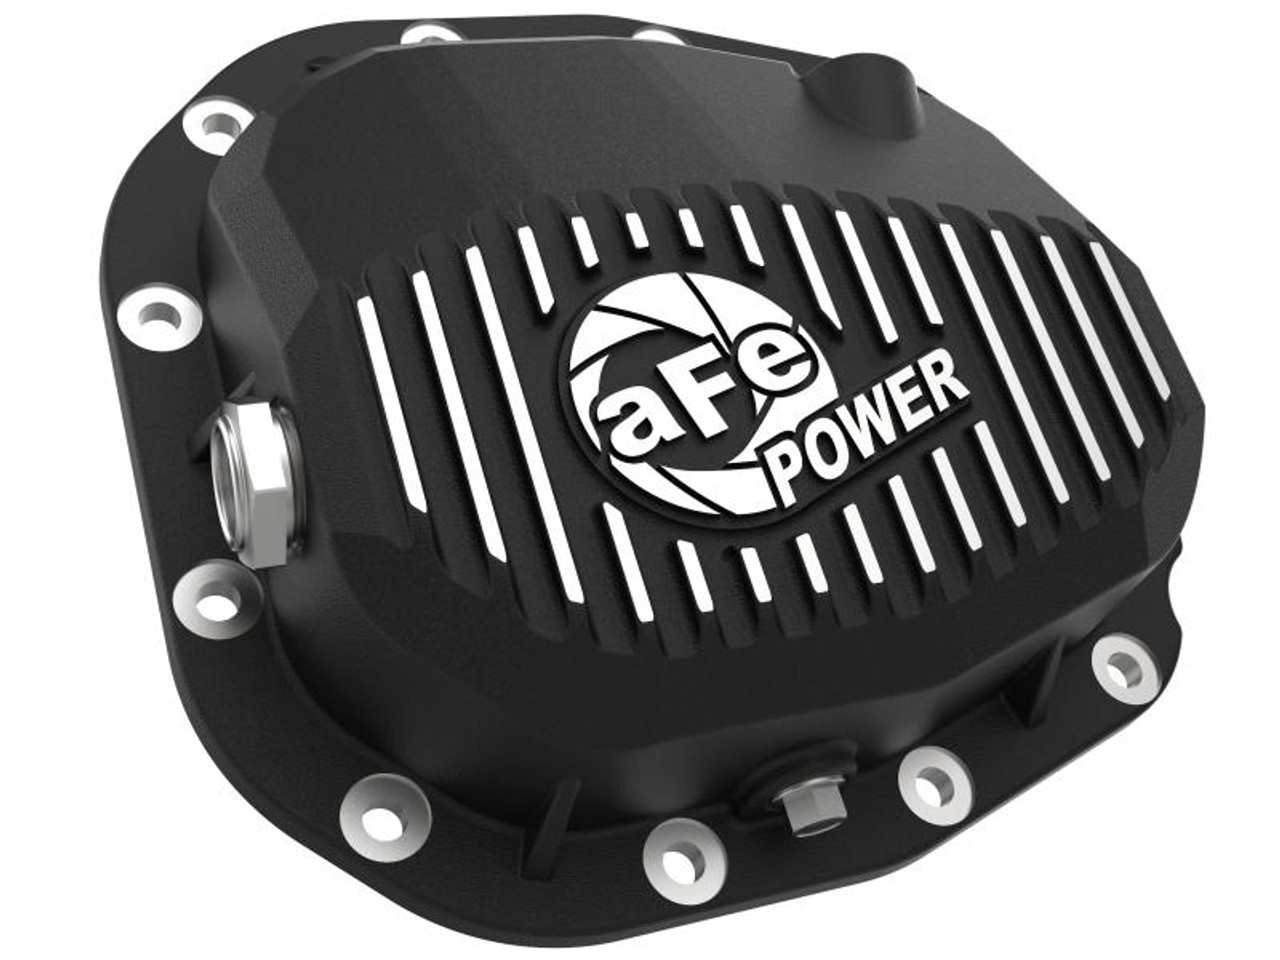 AFE aFe Pro Series Rear Differential Cover Black w/ Fins 15-19 Ford F-150 w/ Super 8.8 Rear Axles - 46-71180B